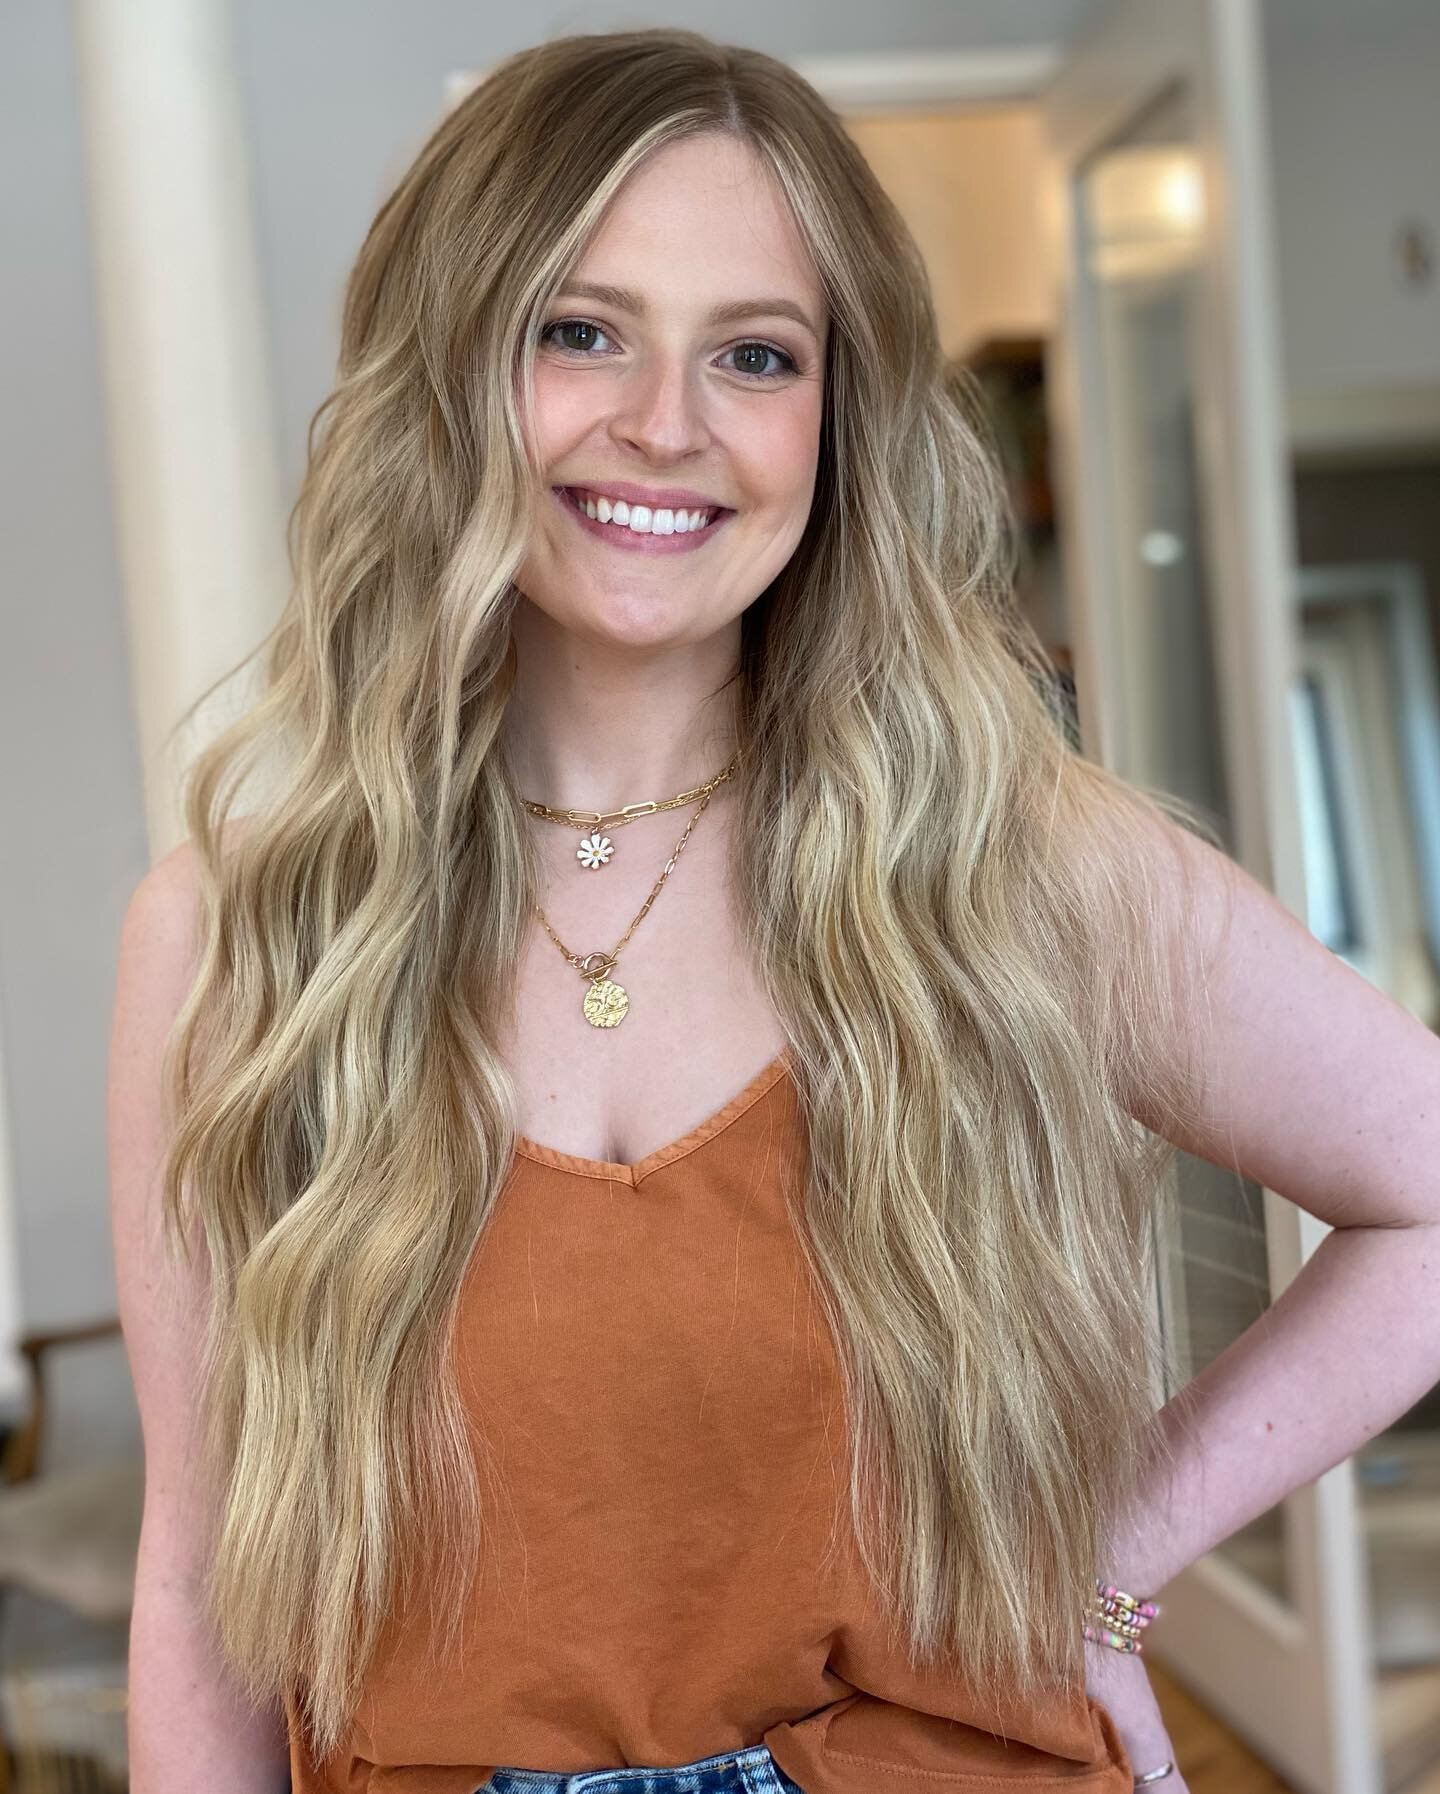 only the best hair for @lanie_lawson 🦋

my favvvvorite kind of extensions &amp; color &mdash; low maintenance, natural but noticeable. twenty two inches of gorgeous, sandy @covetandmane hair ☁️ if you want extensions for the summer, book your consul